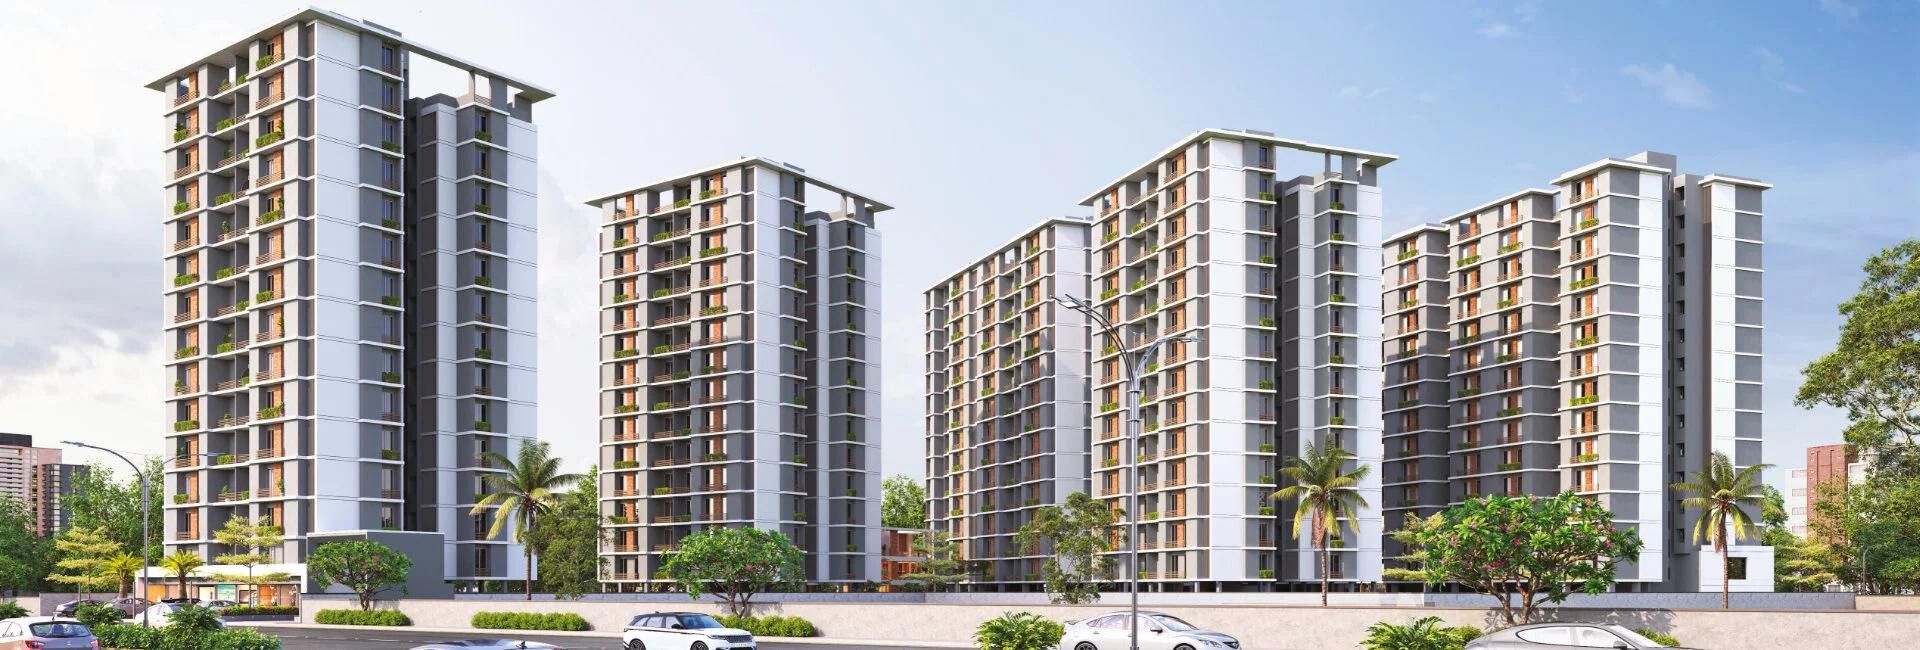 Experion Sector 48 Gurgaon